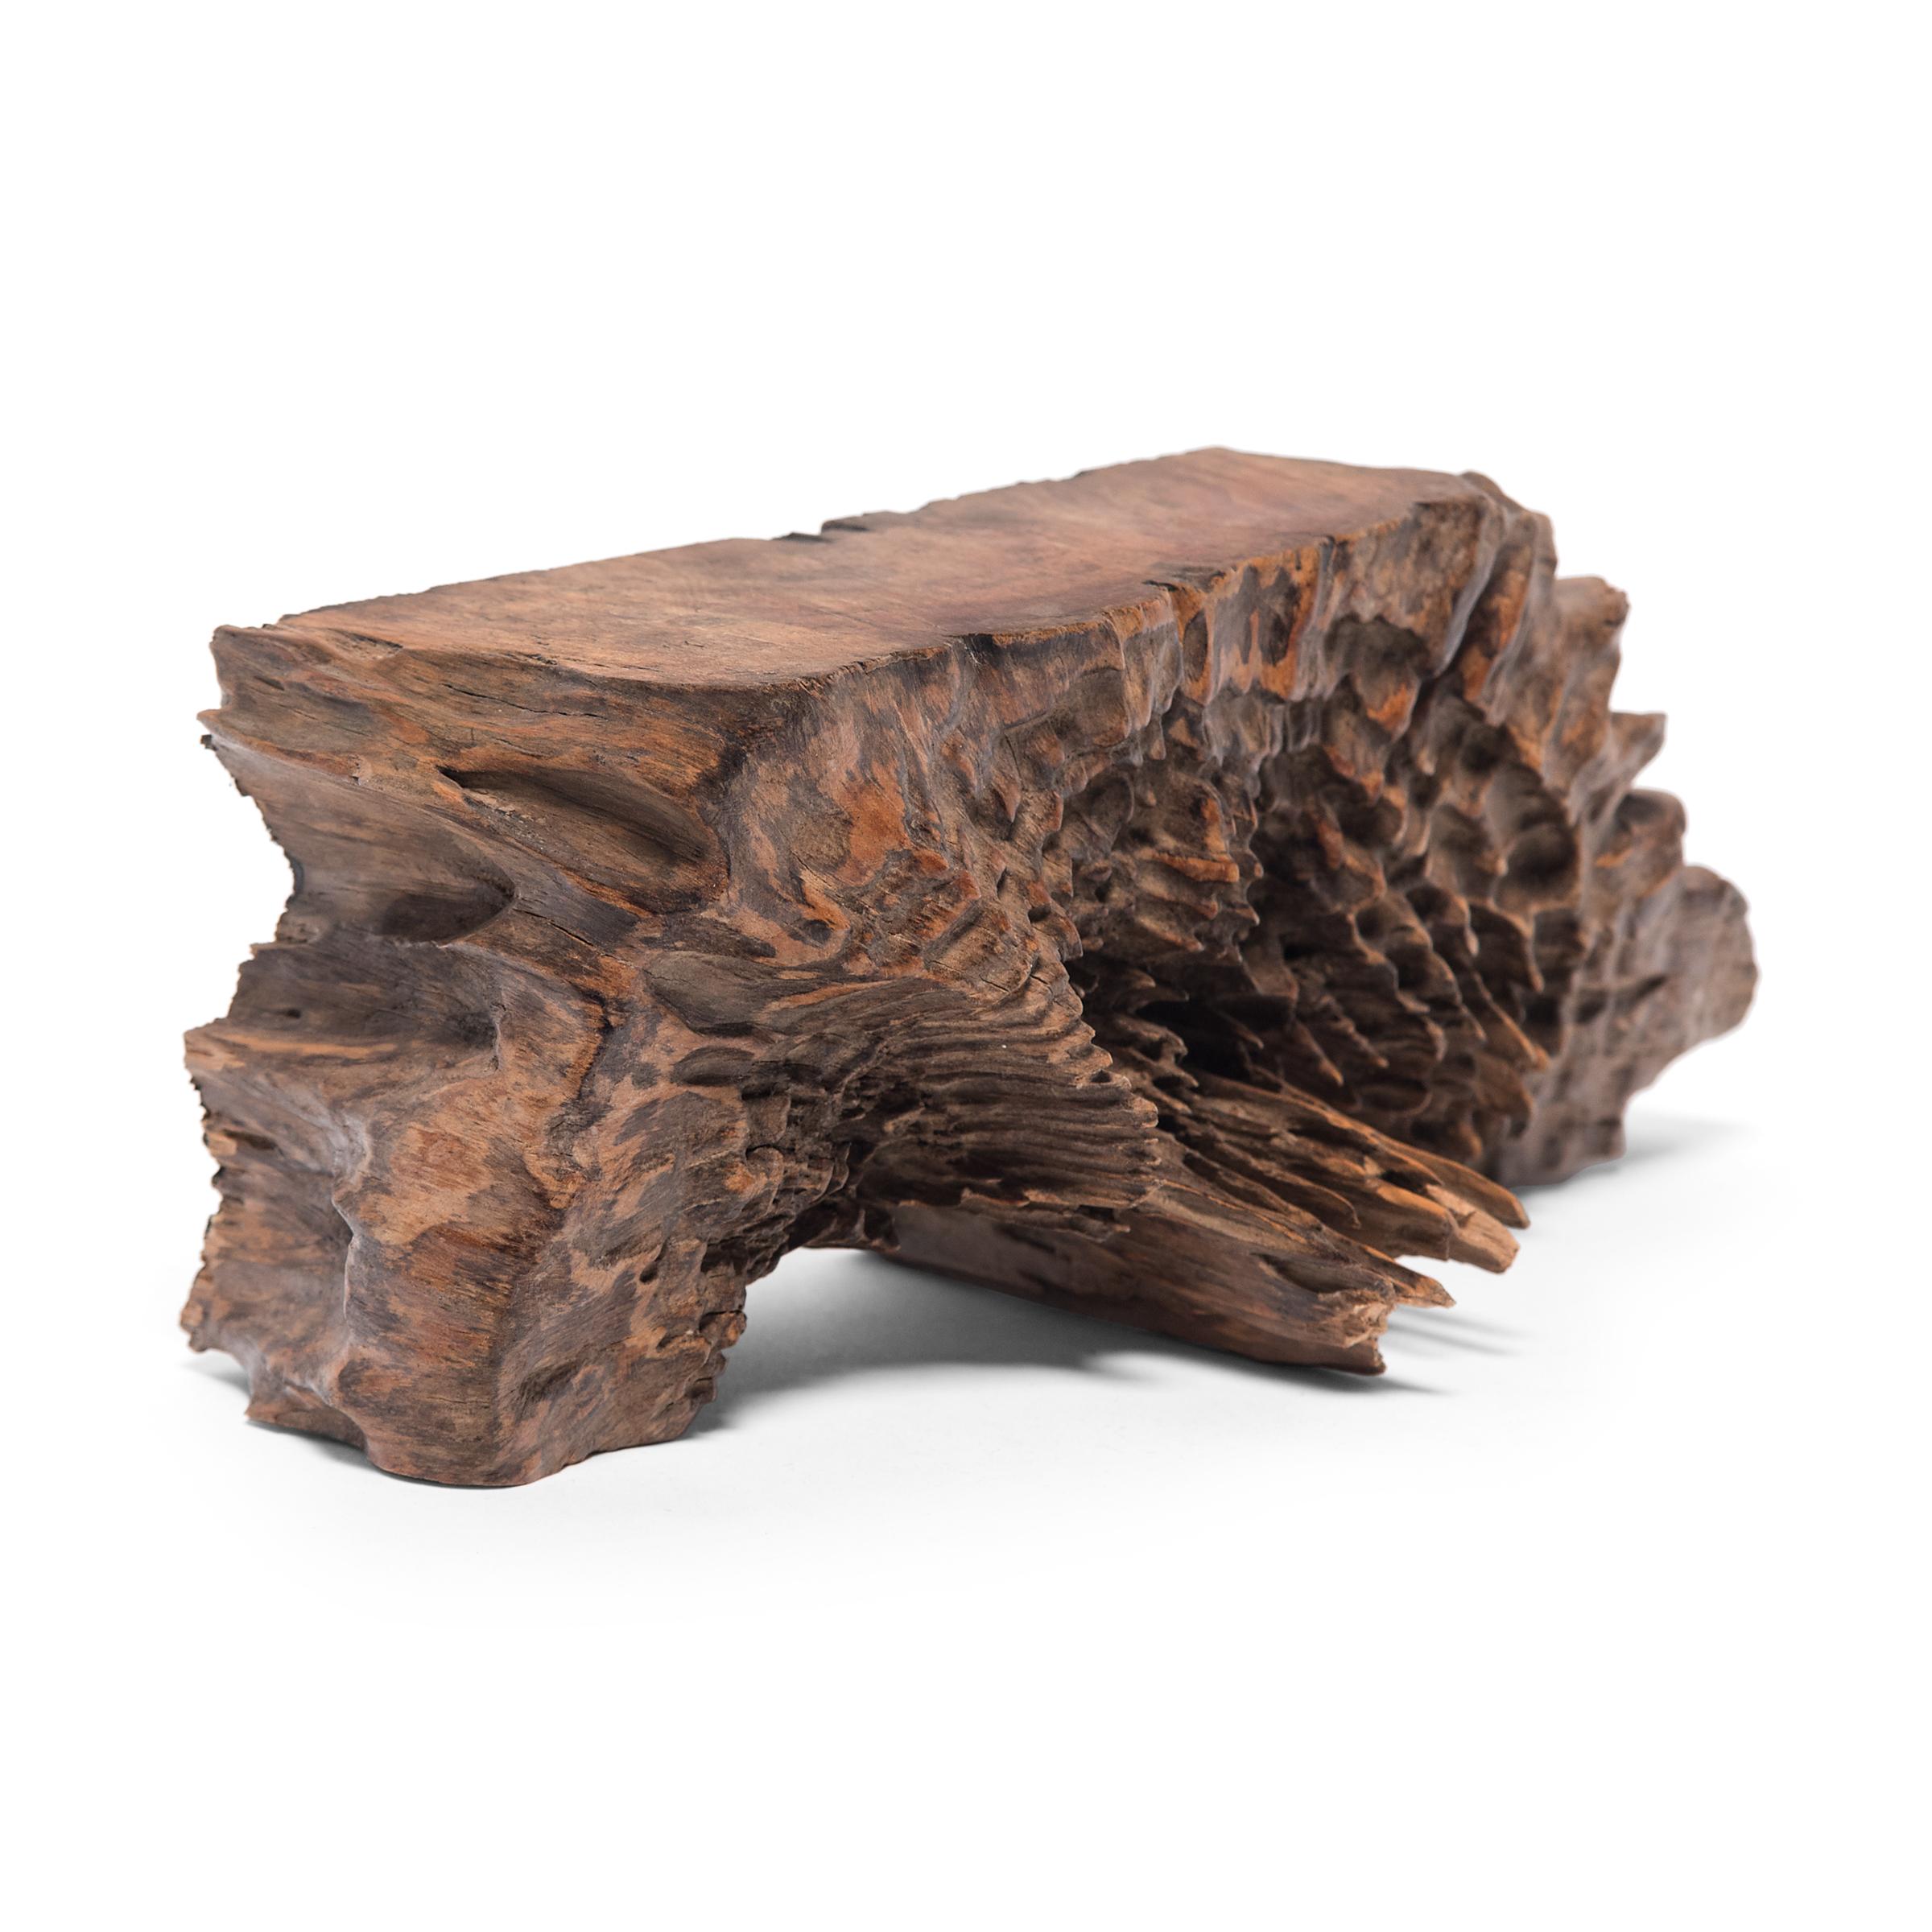 Dated to the early 20th century, this fantastic tabletop display stand is crafted from the cross-section of a camphor tree trunk. Shaped by the elements, the wood has eroded with time to create a highly textured surface of peaks and valleys along